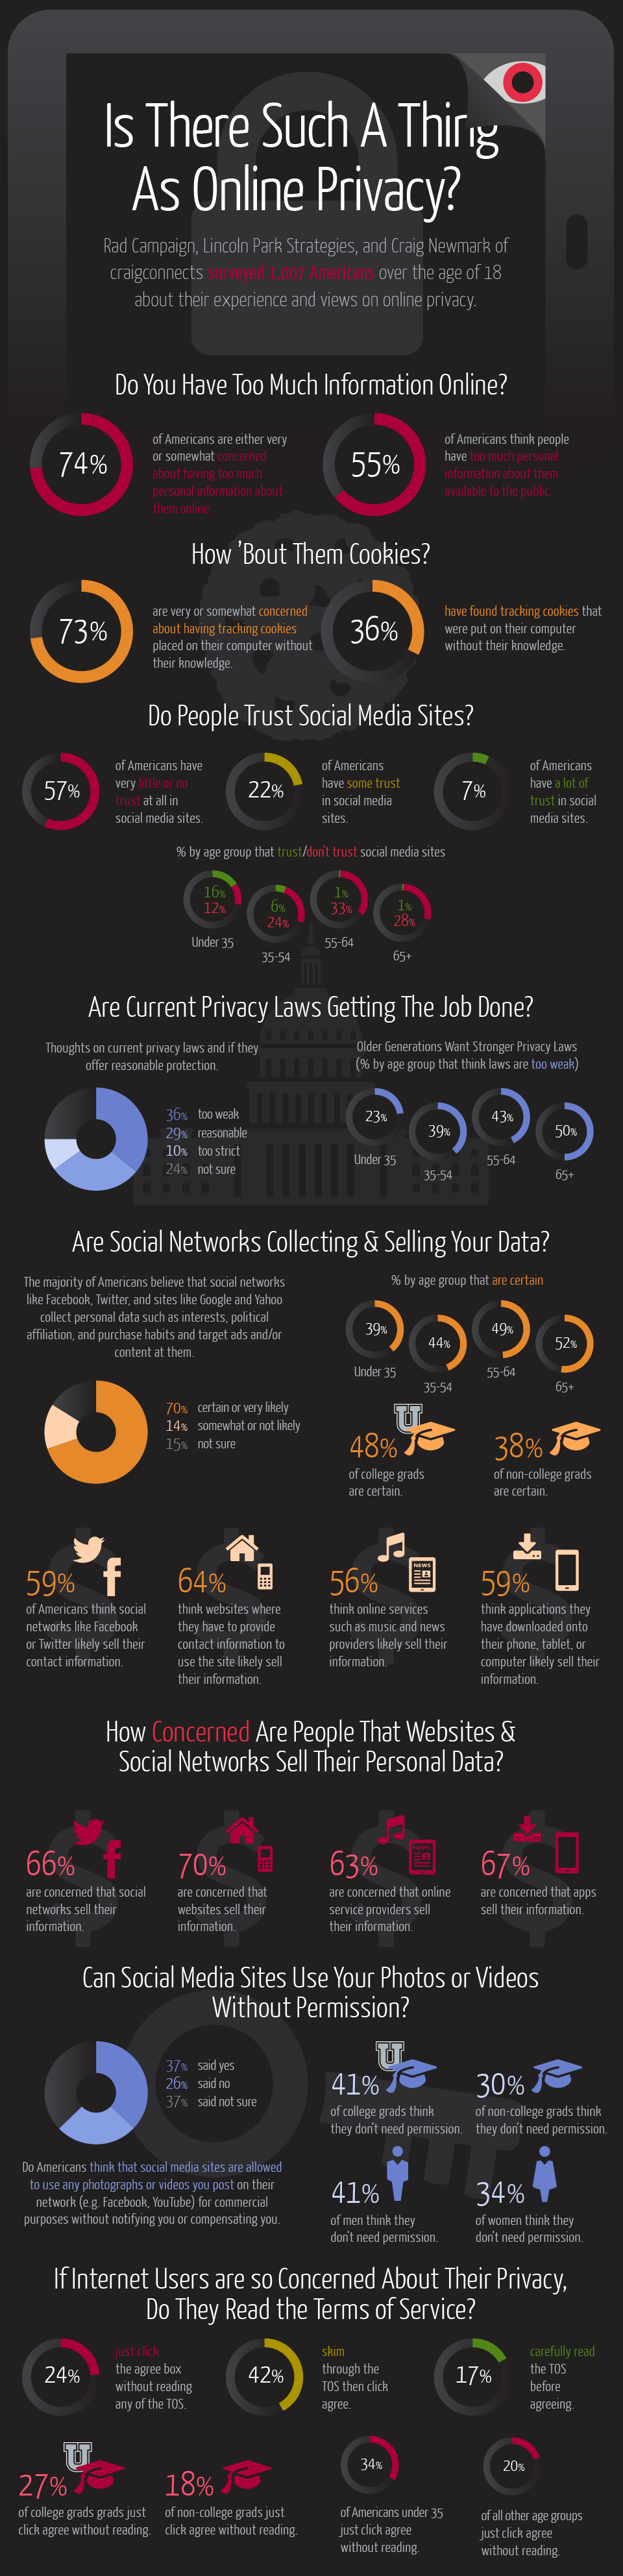 Online Privacy Data 2016